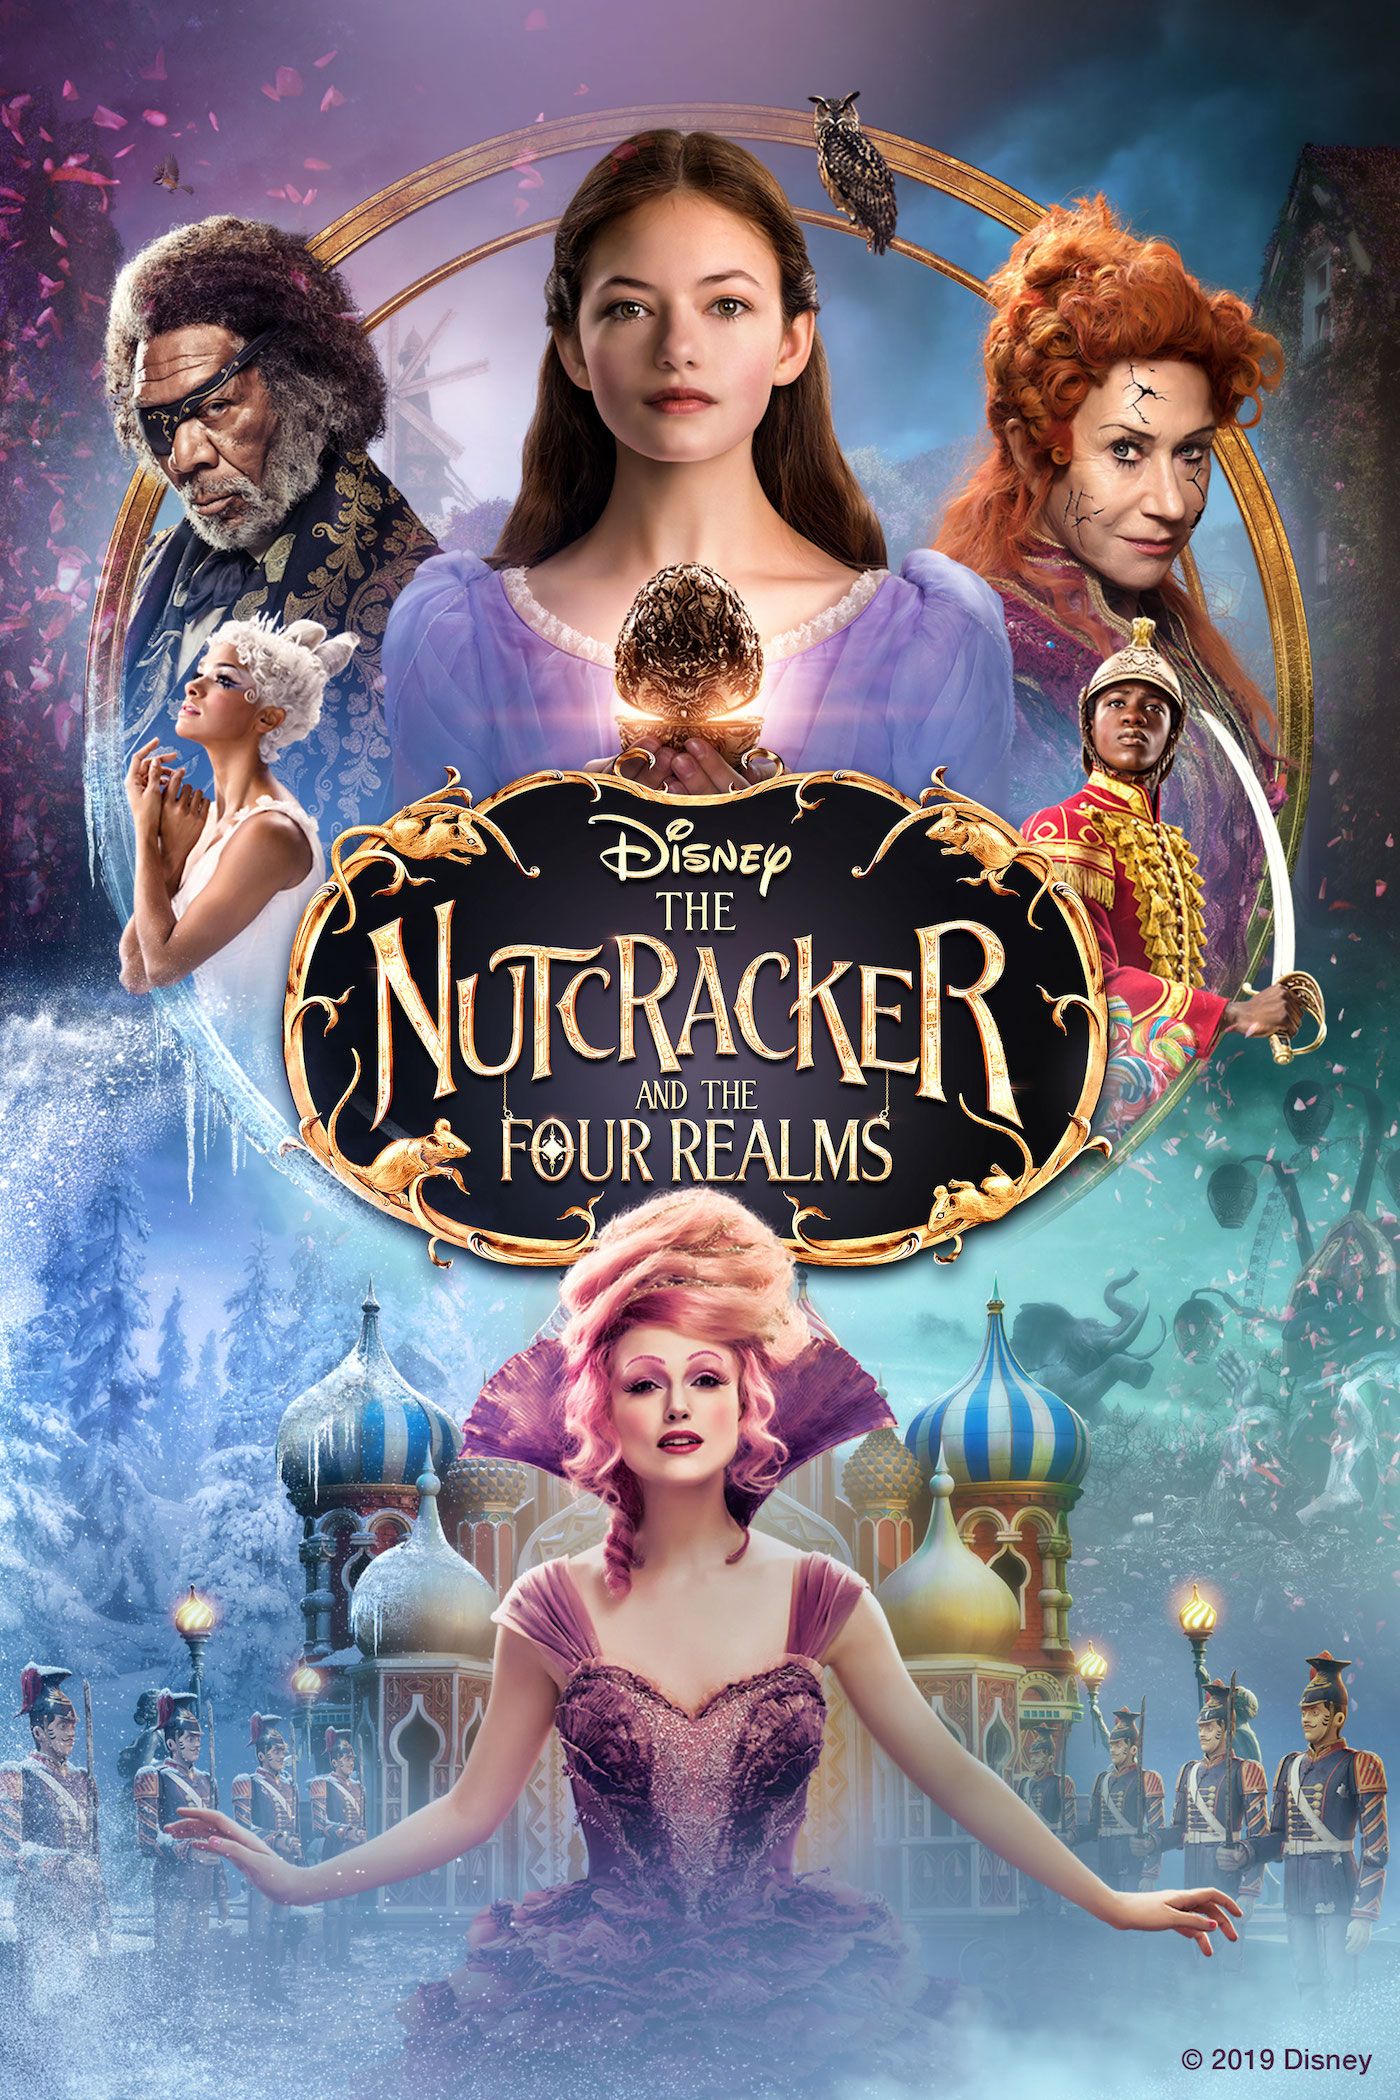 The nutcracker and the four realms review